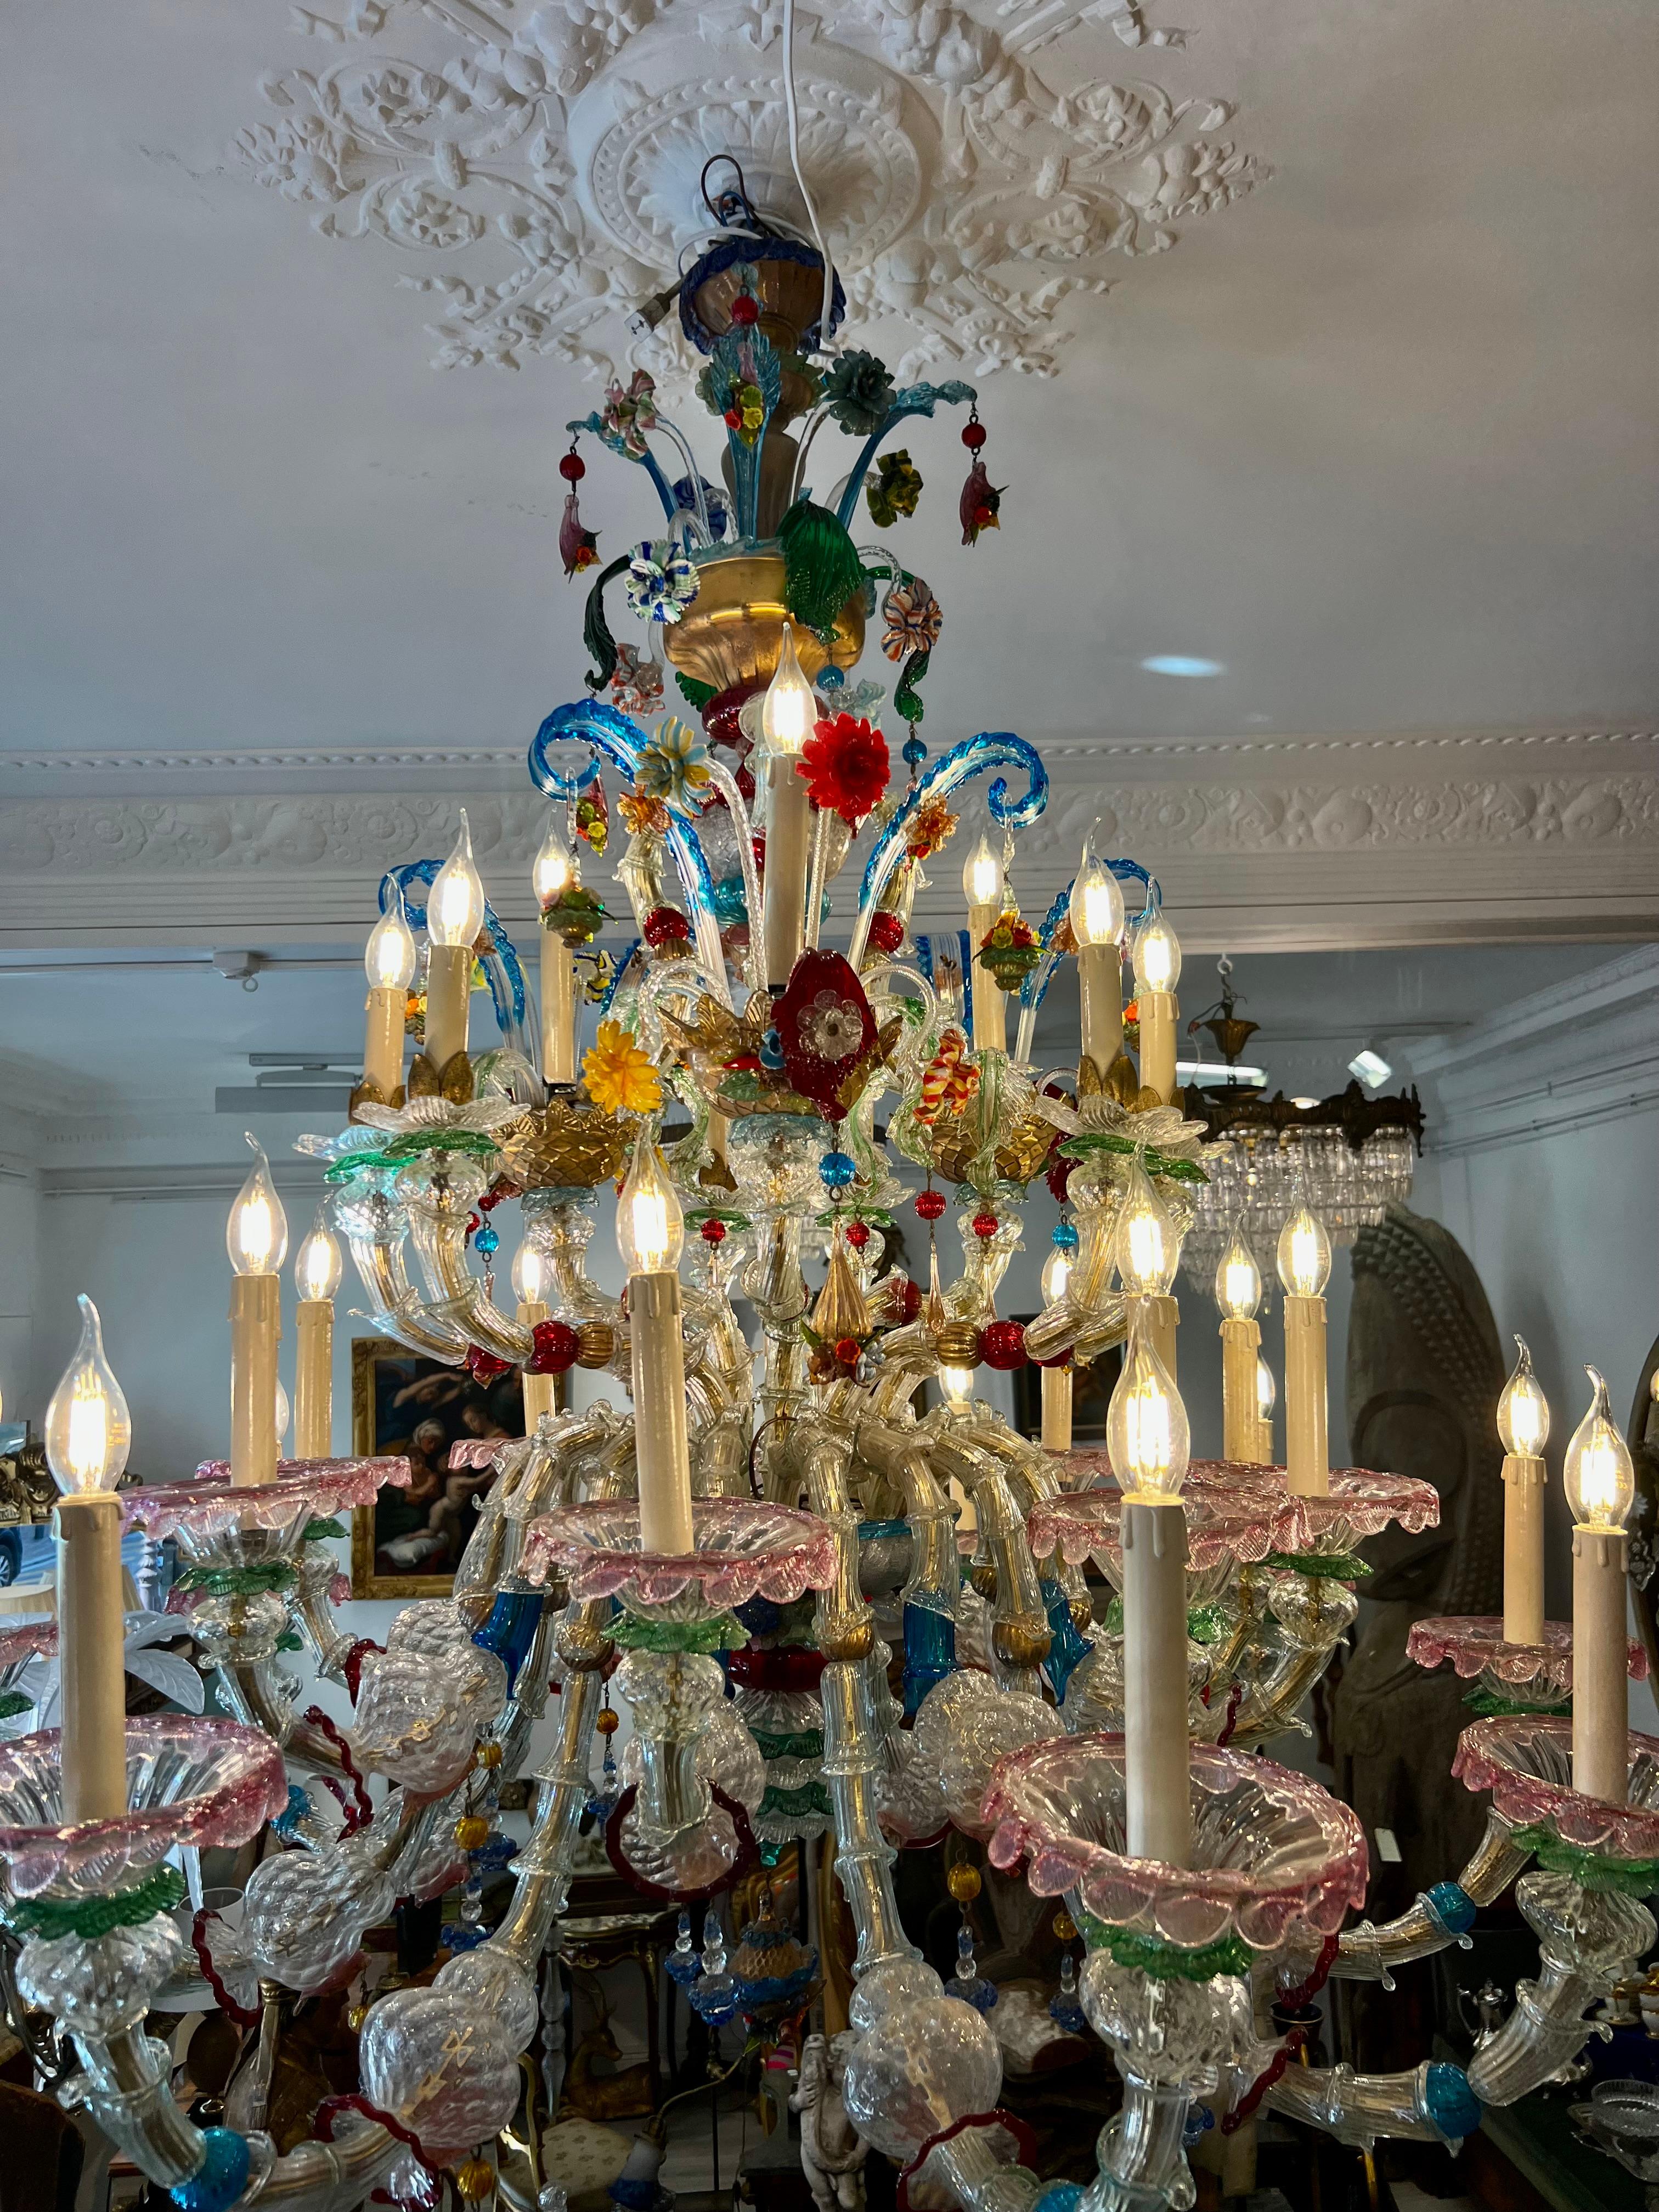 Murano glass rezzonico chandelier multicoloured flowers 27 lights early 20th Italy This chandelier stands out for its vivid multitude of colours, which make it an outstanding example of the best Murano glass art. 27 Arms spread out from the central